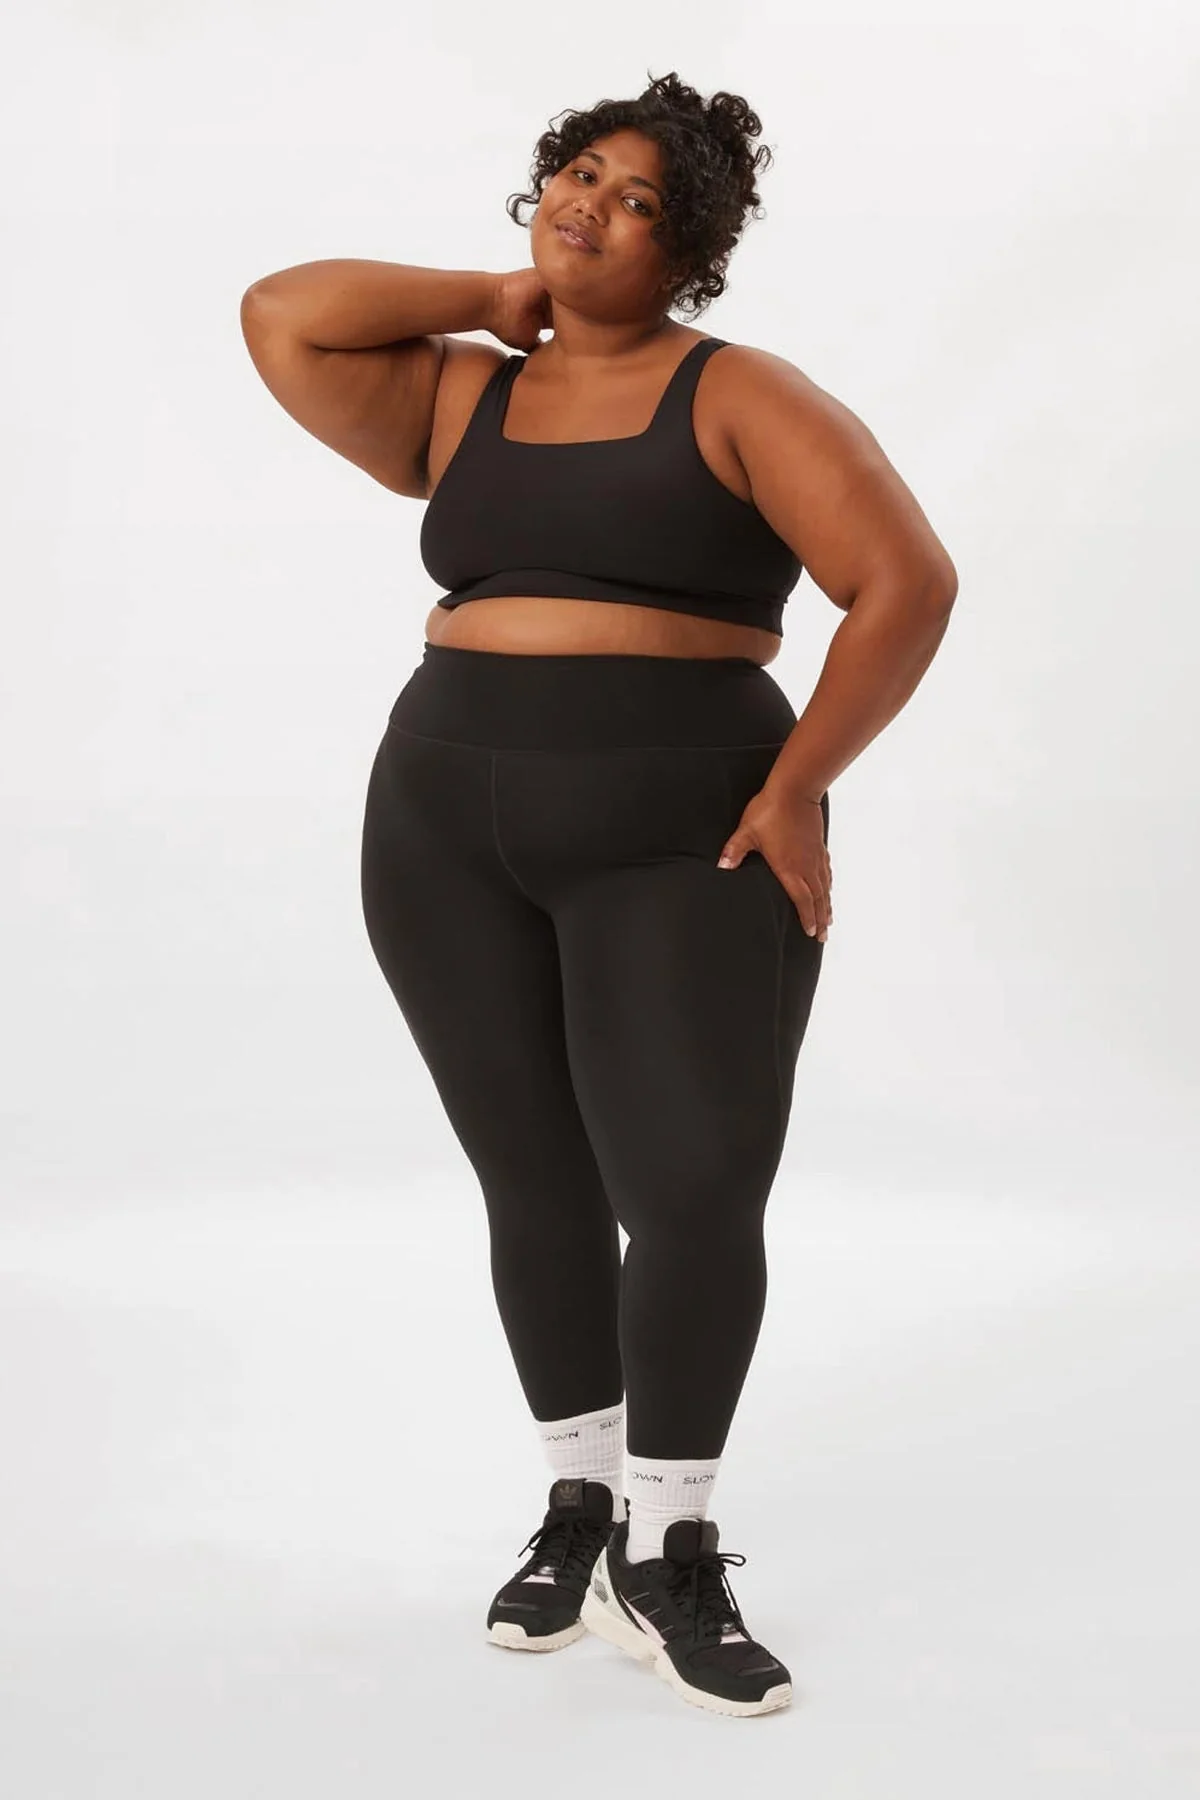 The best cheap workout clothes that are just as good as Nike, Lululemon and  more - CNET